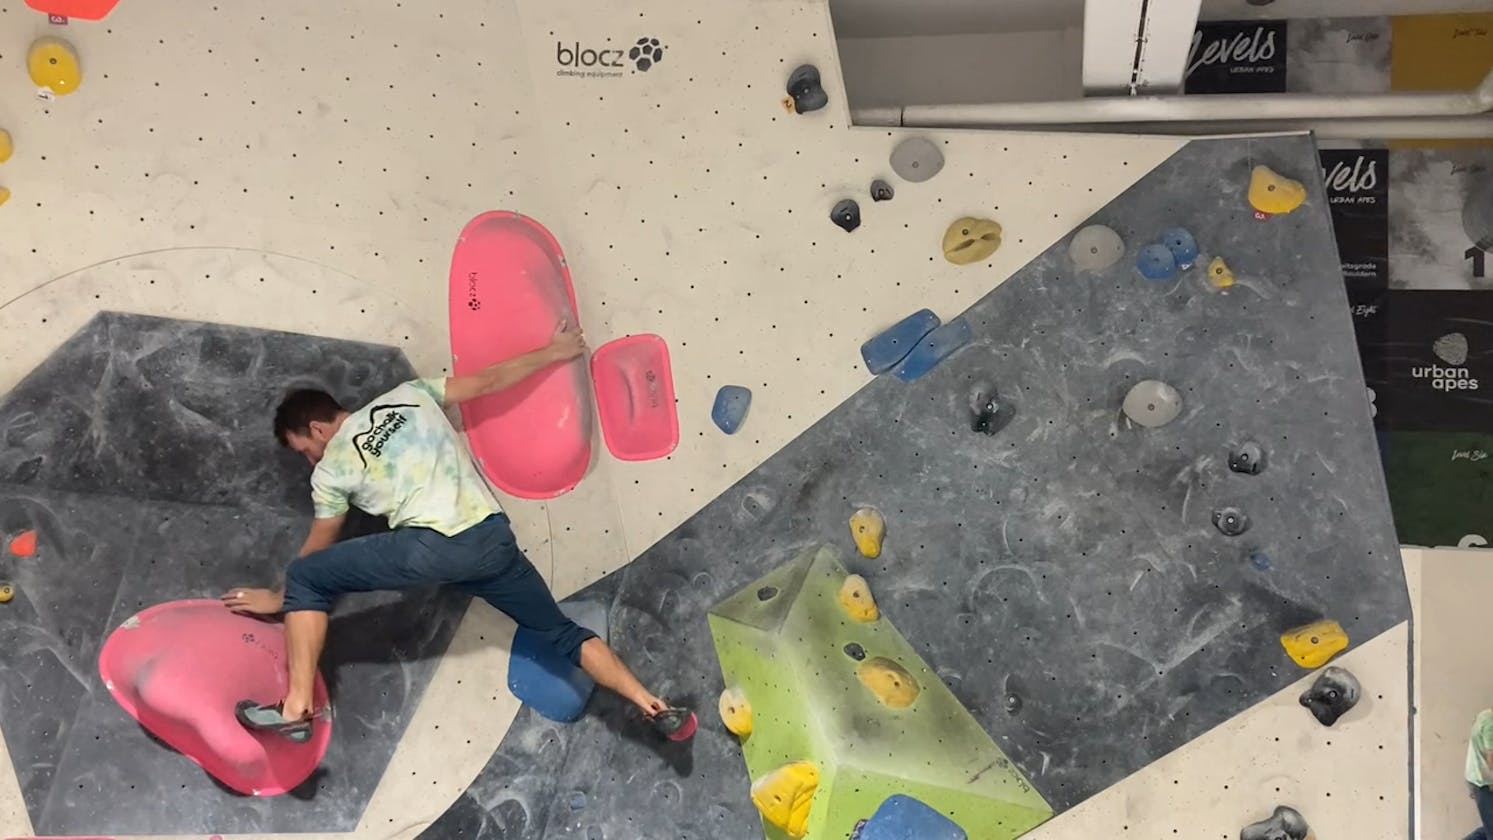 Essential Apps and Websites Every Bouldering Enthusiast Needs